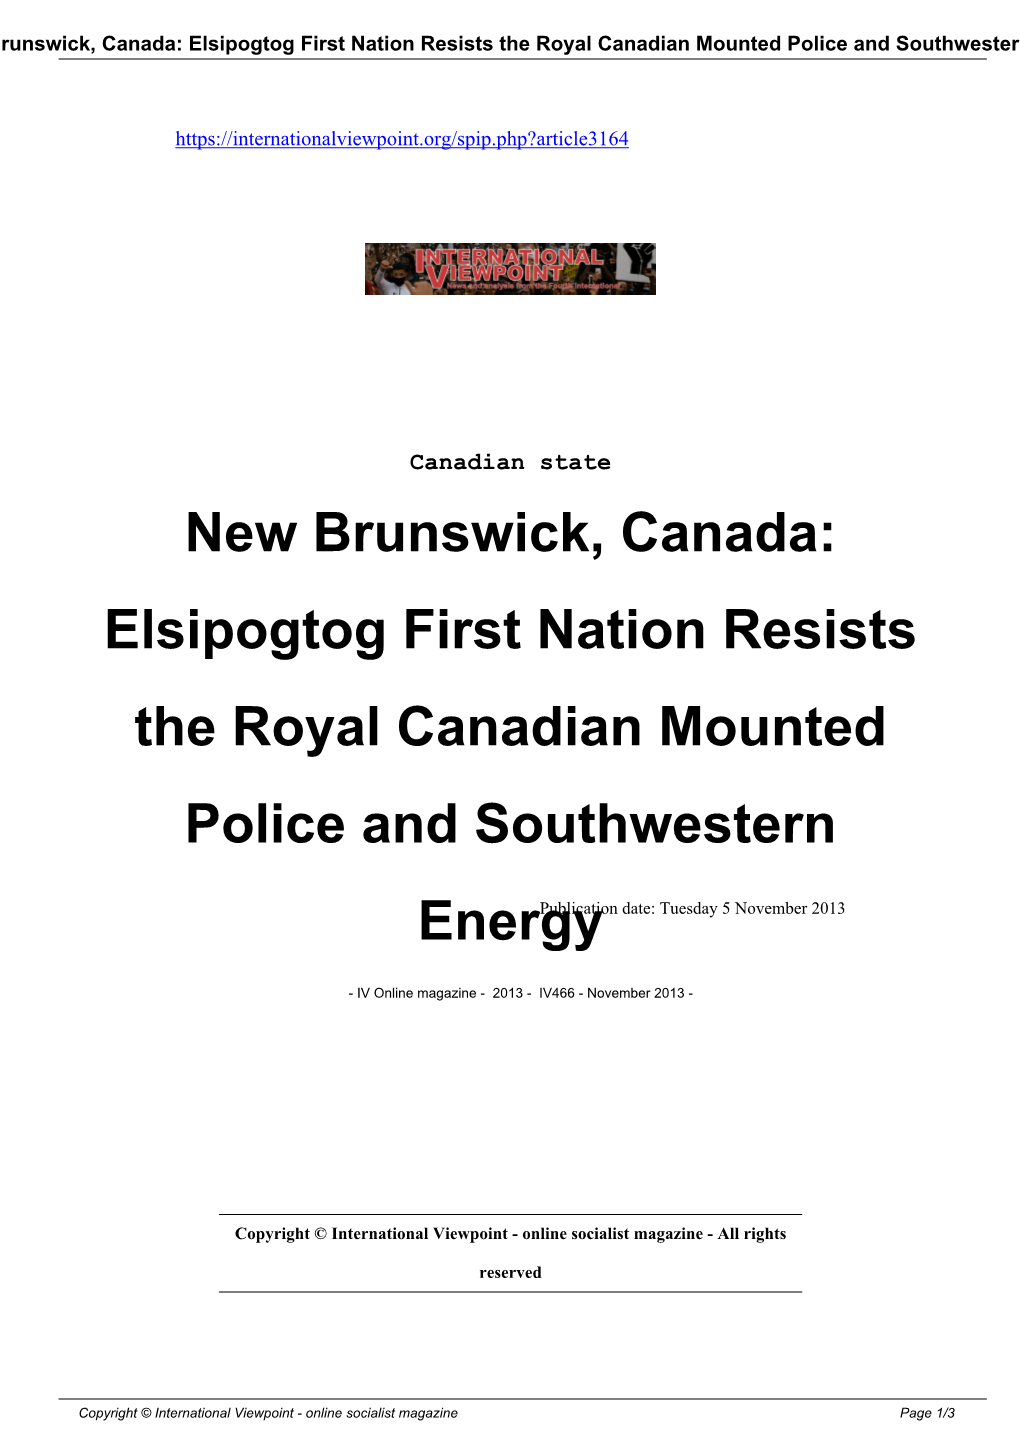 New Brunswick, Canada: Elsipogtog First Nation Resists the Royal Canadian Mounted Police and Southwestern Energy